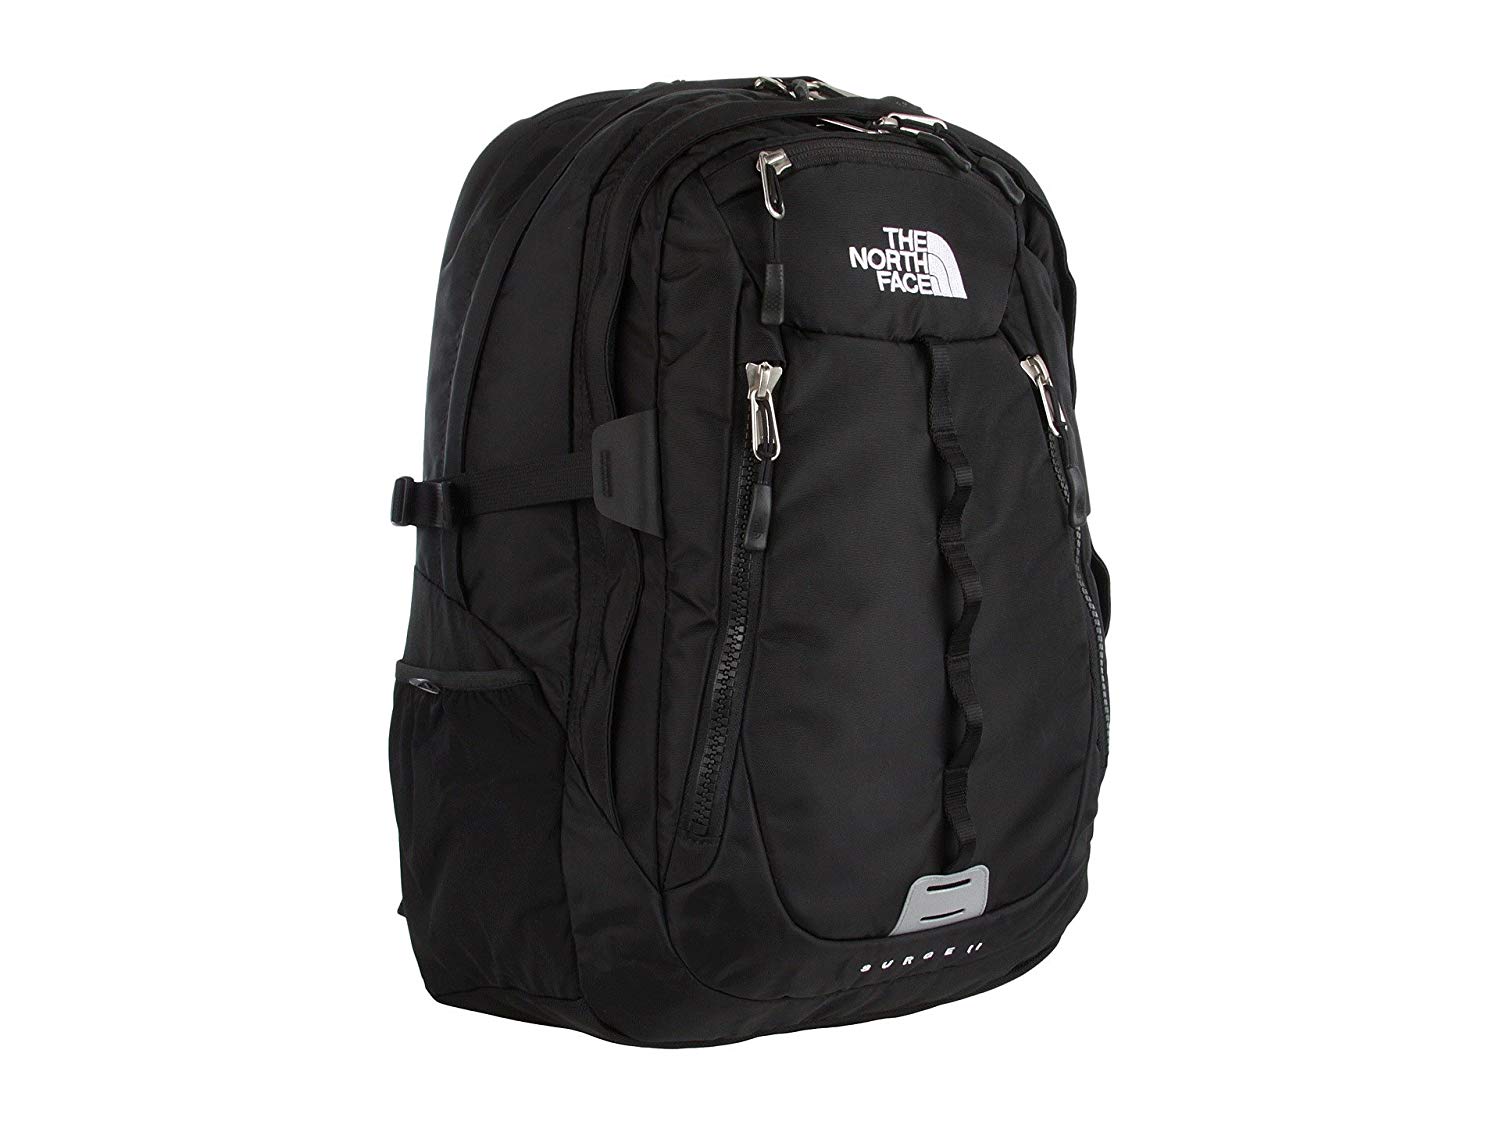 The North Face Surge II Backpack The North Face ktmart.vn 3